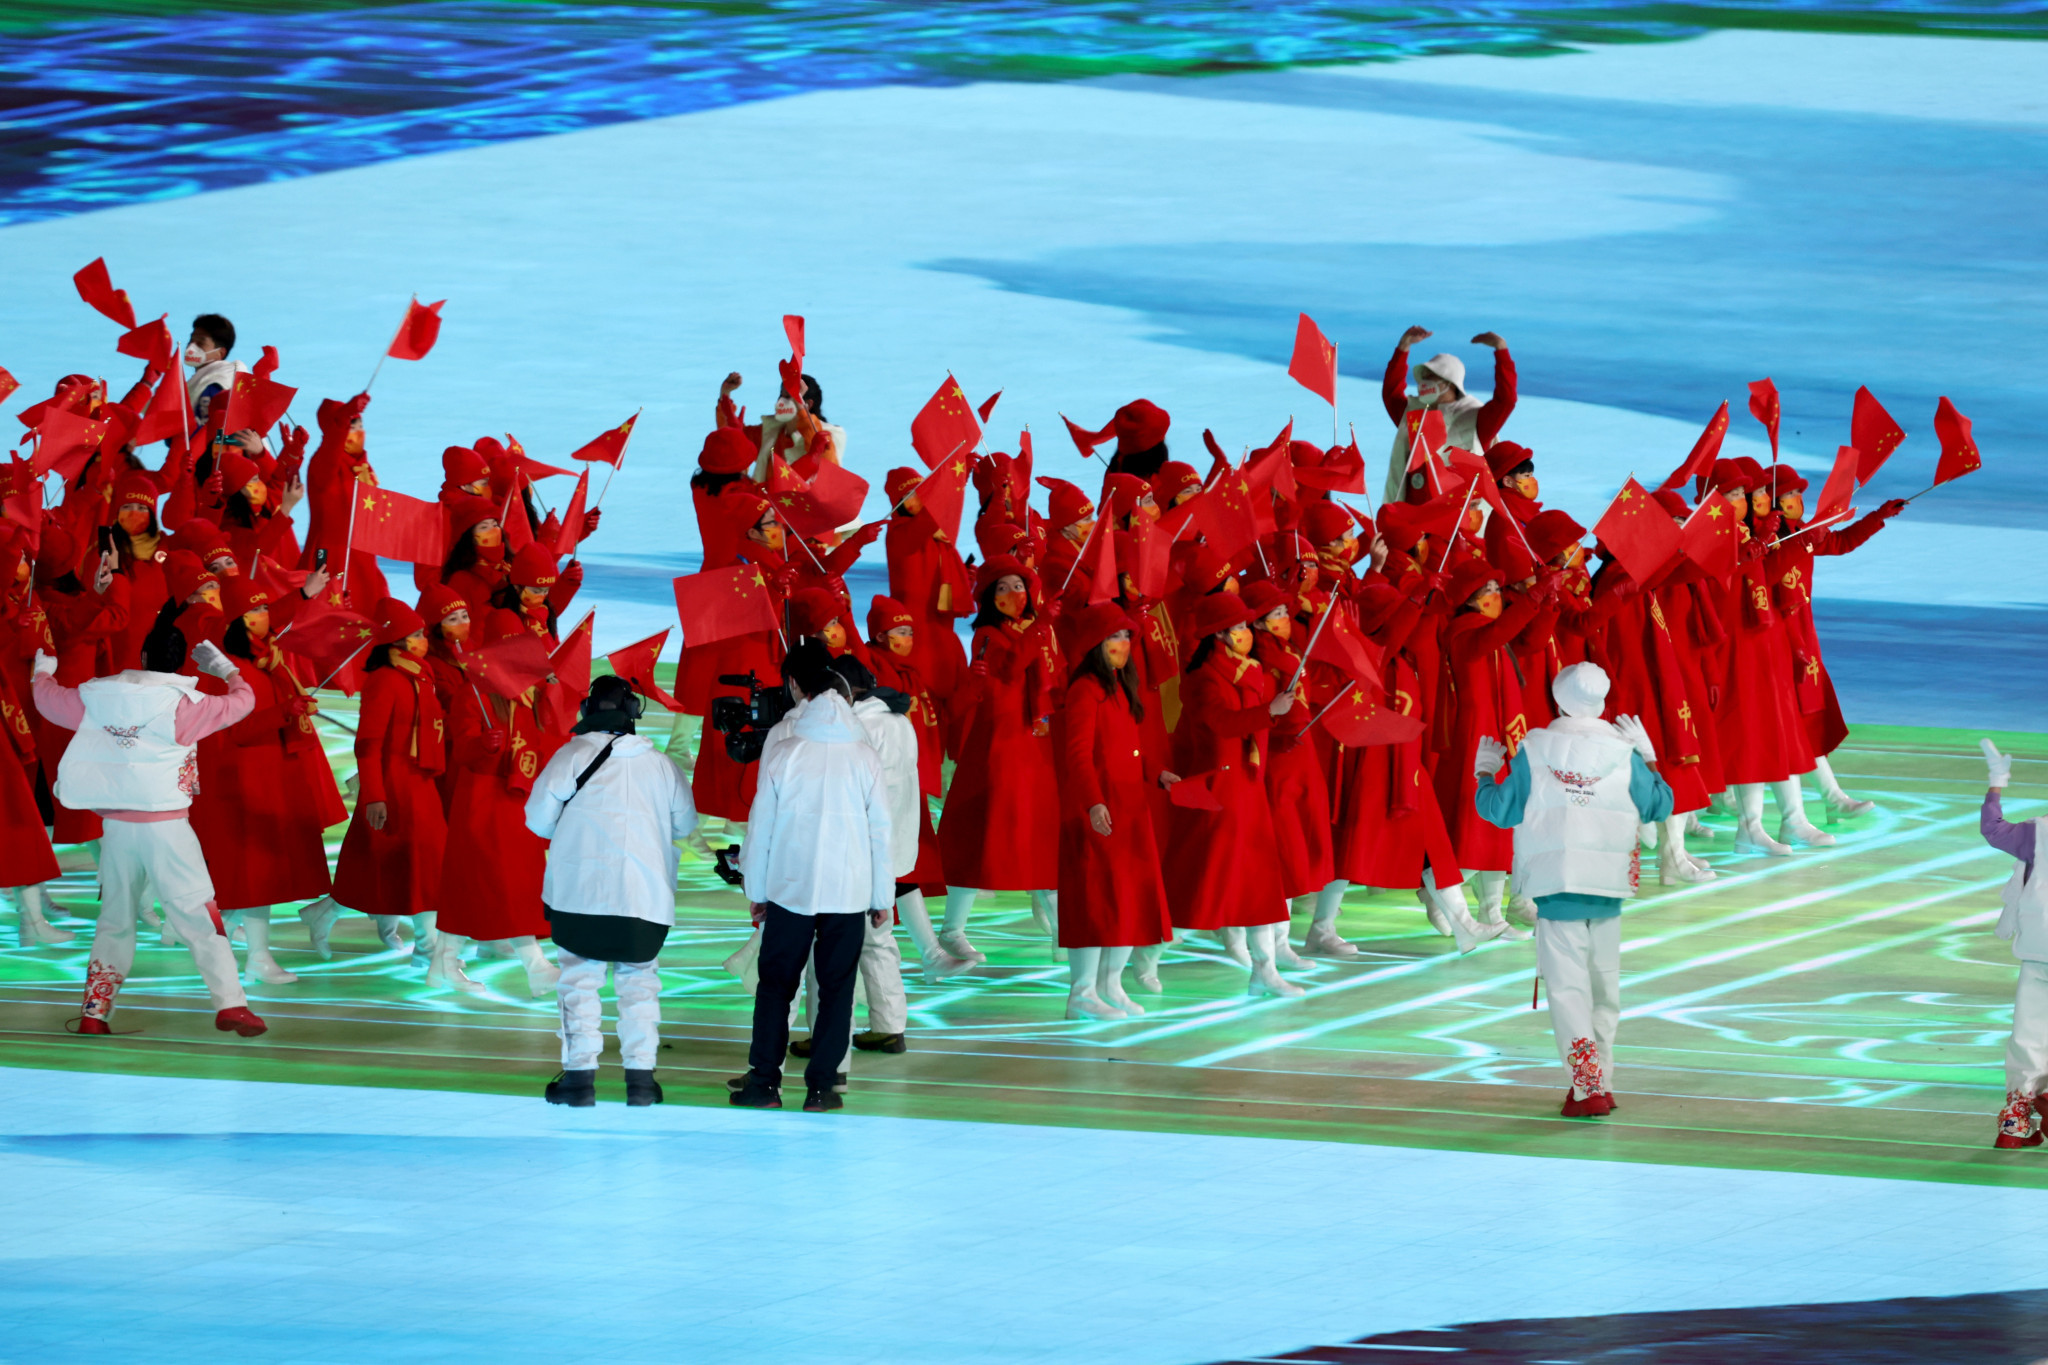 China entered the stadium to a roar, coming in last, as is tradition for the hosts ©Getty Images